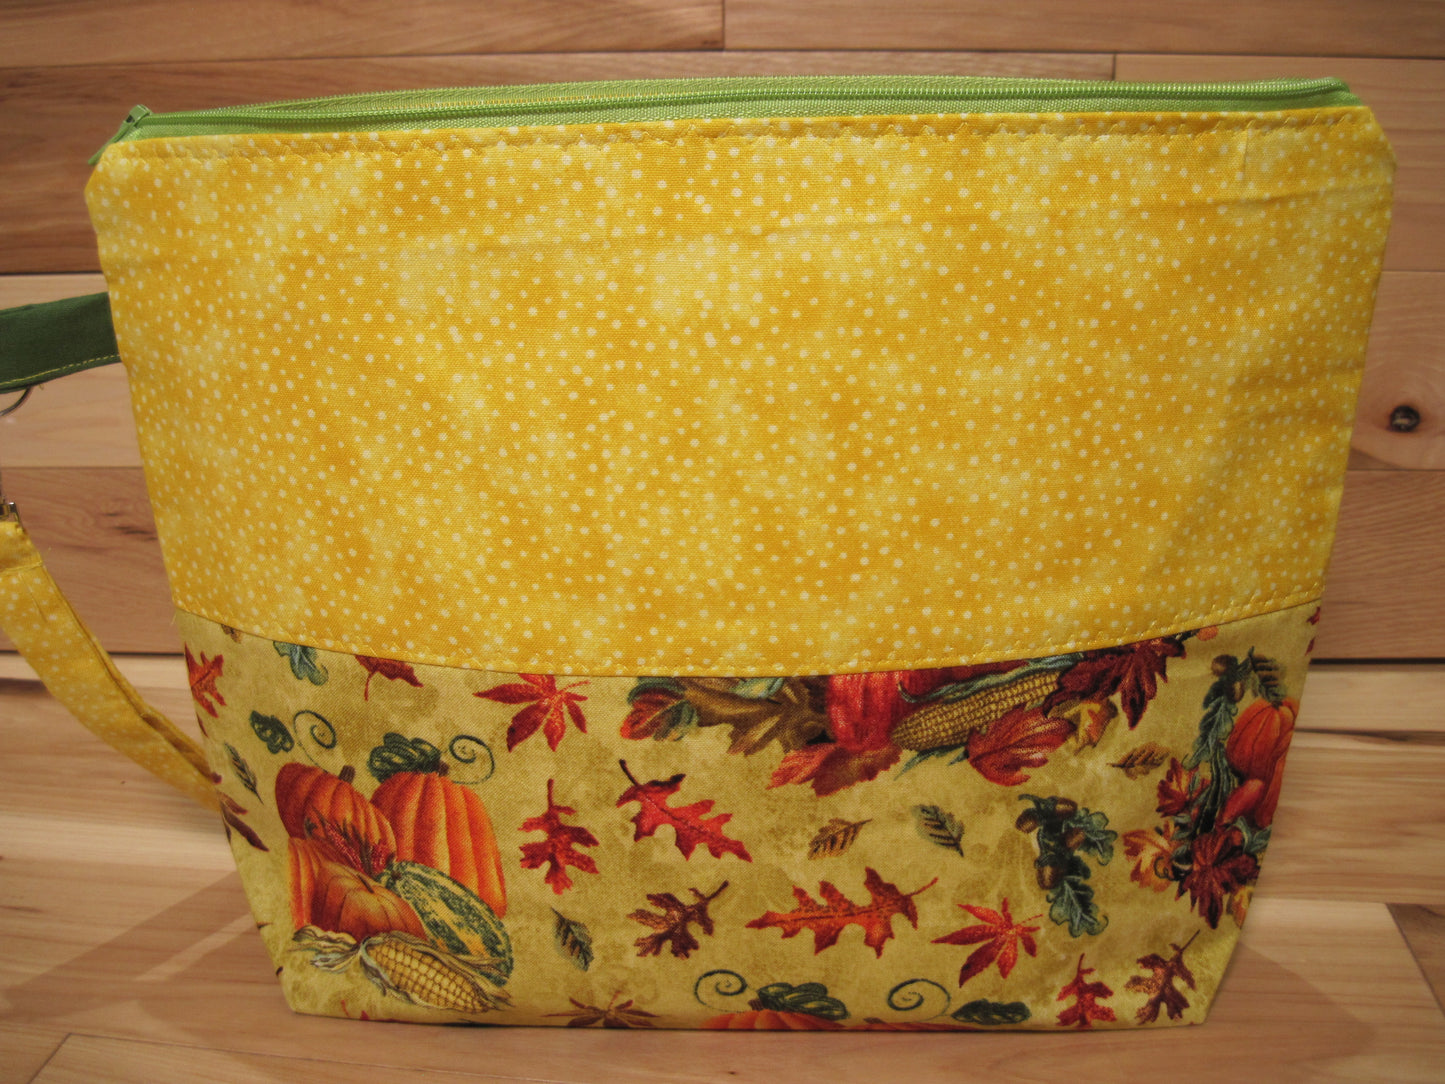 Medium Pumpkin/ Leaves with Yellow project bag